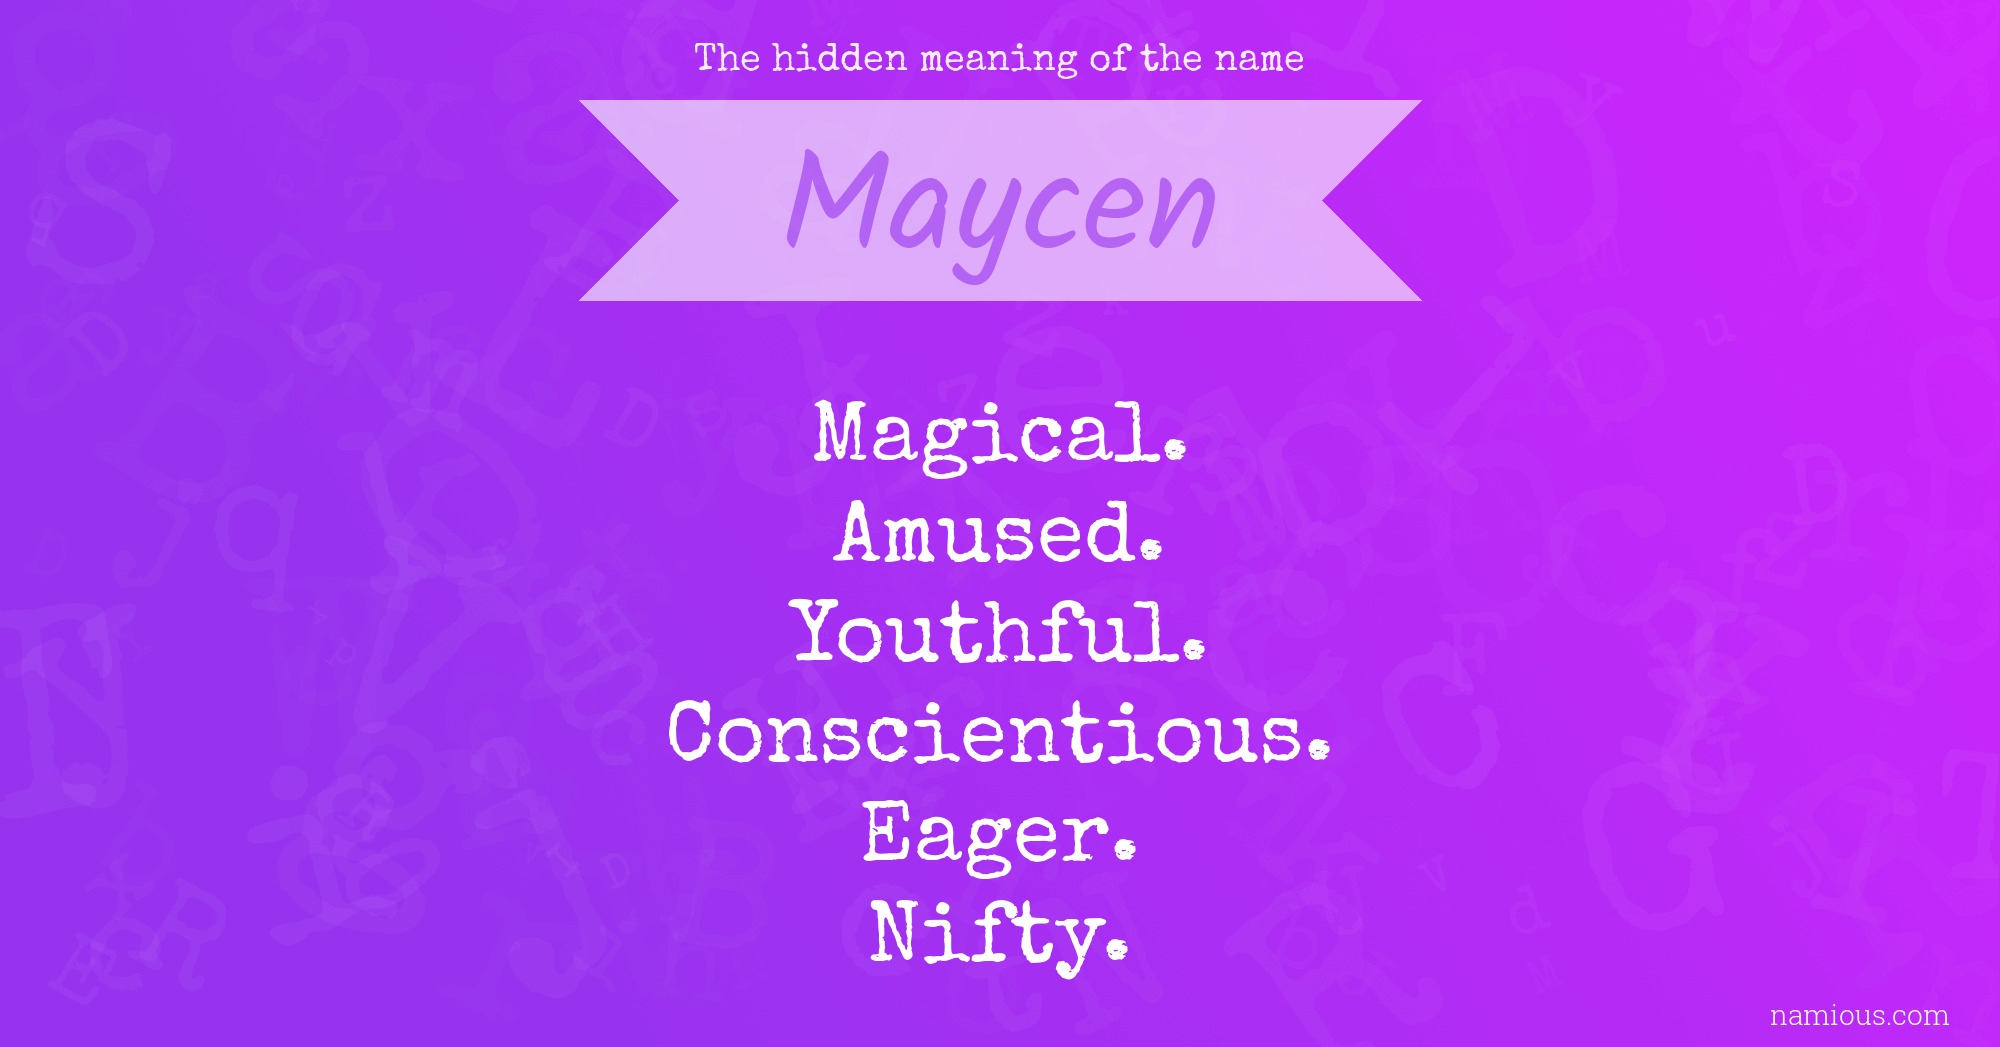 The hidden meaning of the name Maycen